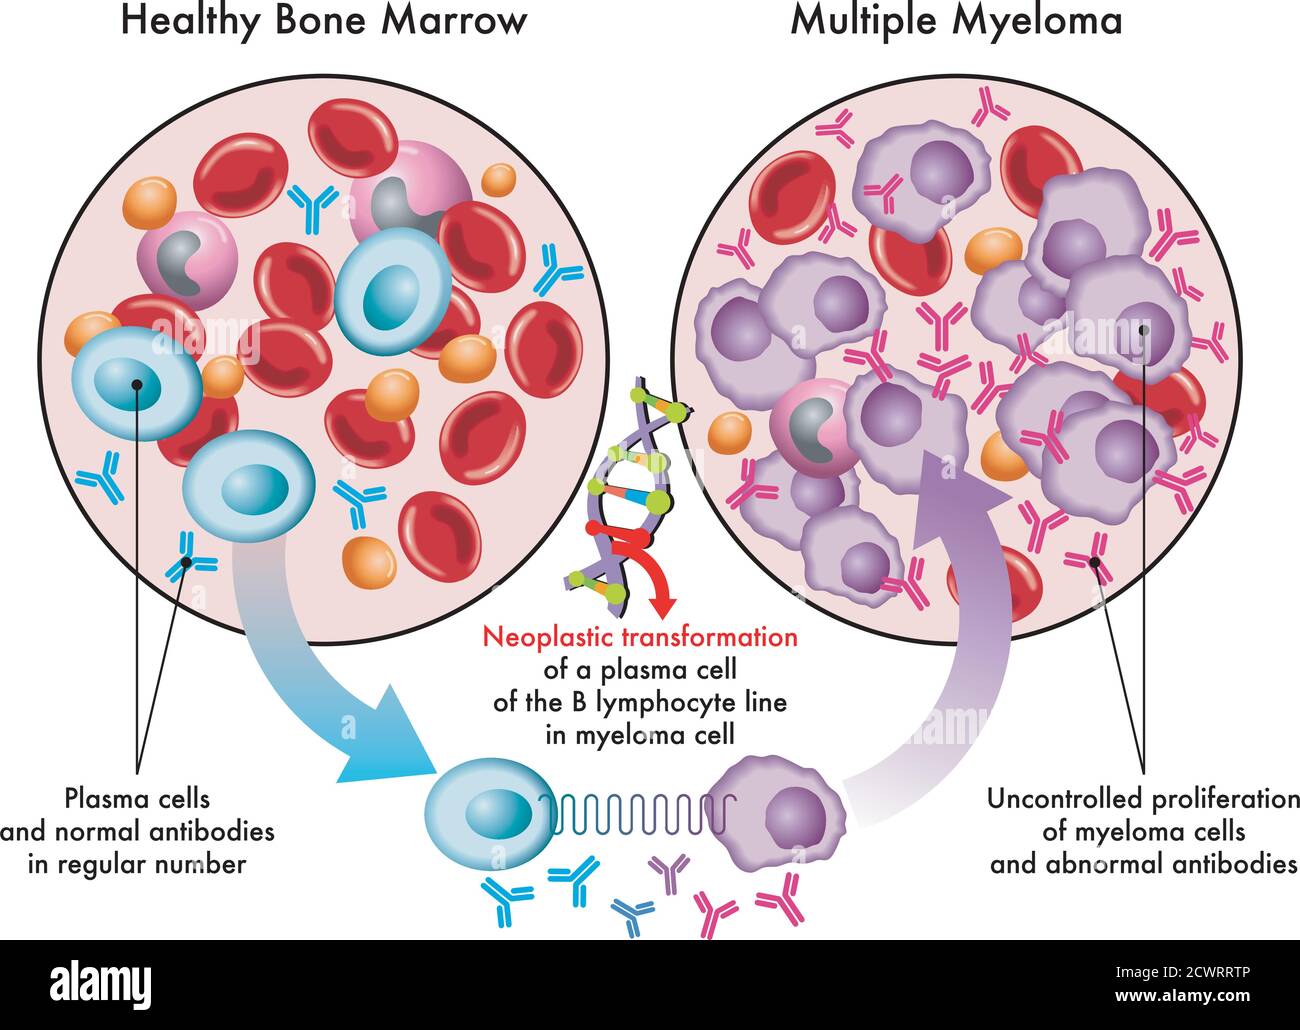 Medical illustration shows the transformation of plasma cells in healthy bone marrow into myeloma cells in multiple myeloma, due to DNA damage. Stock Vector